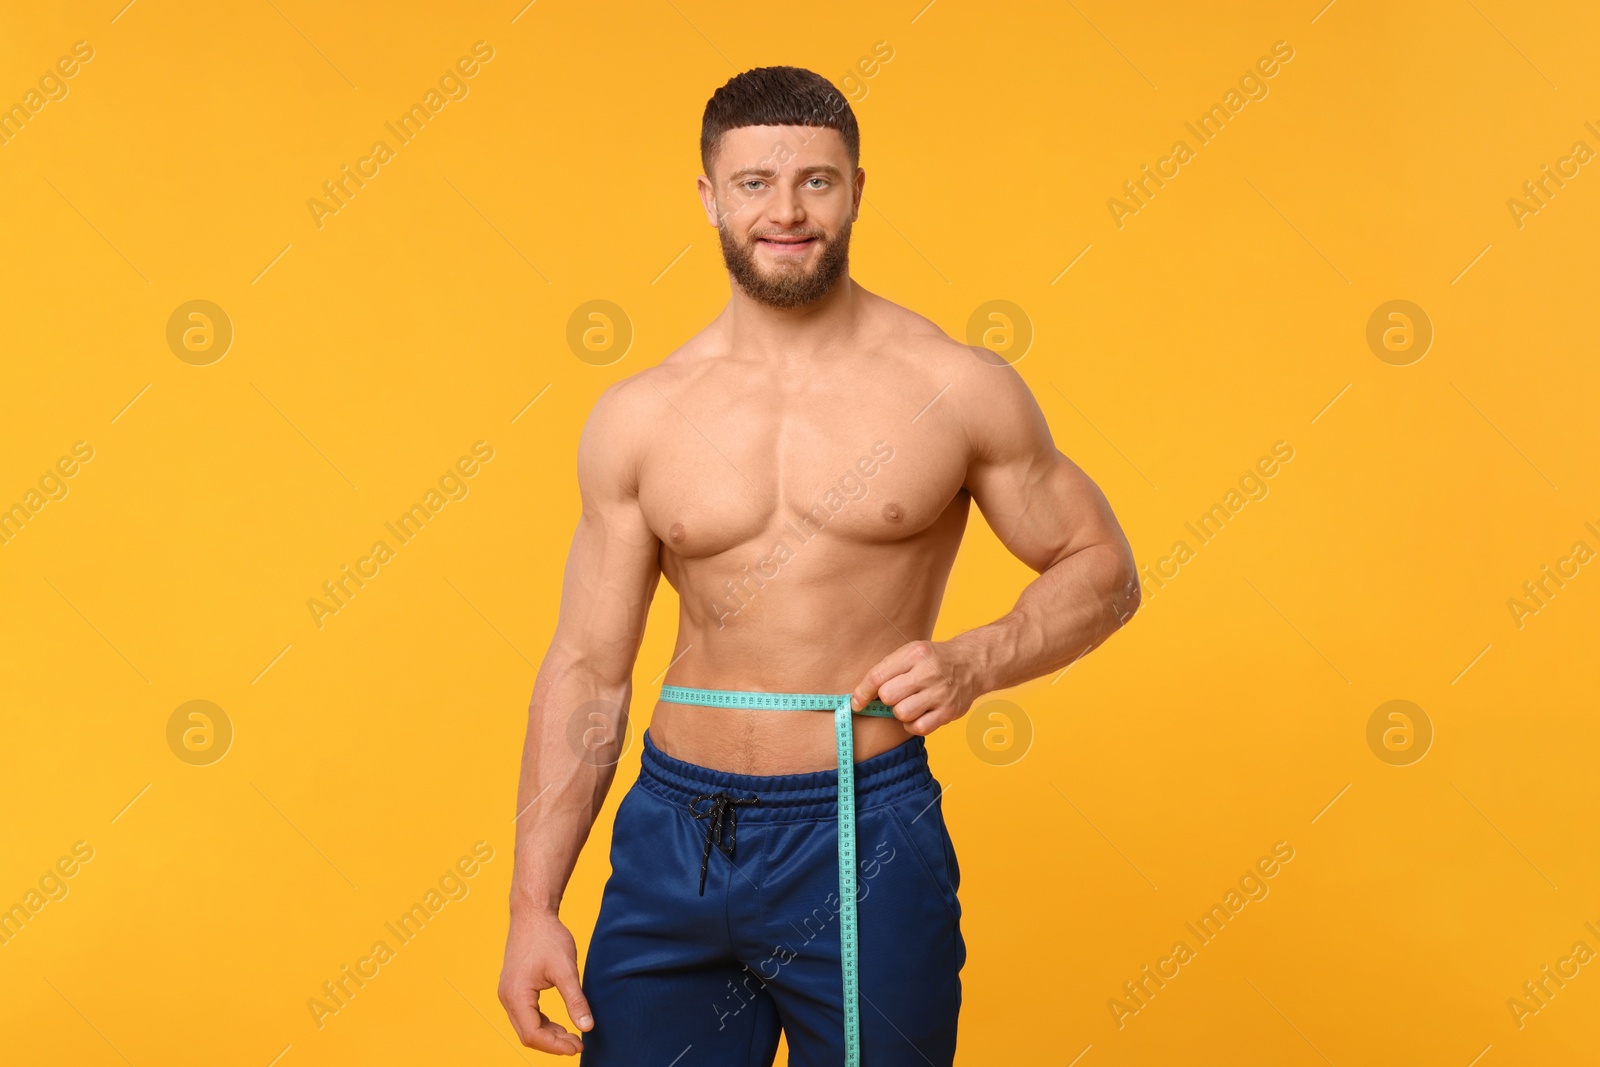 Photo of Athletic man measuring waist with tape on orange background. Weight loss concept